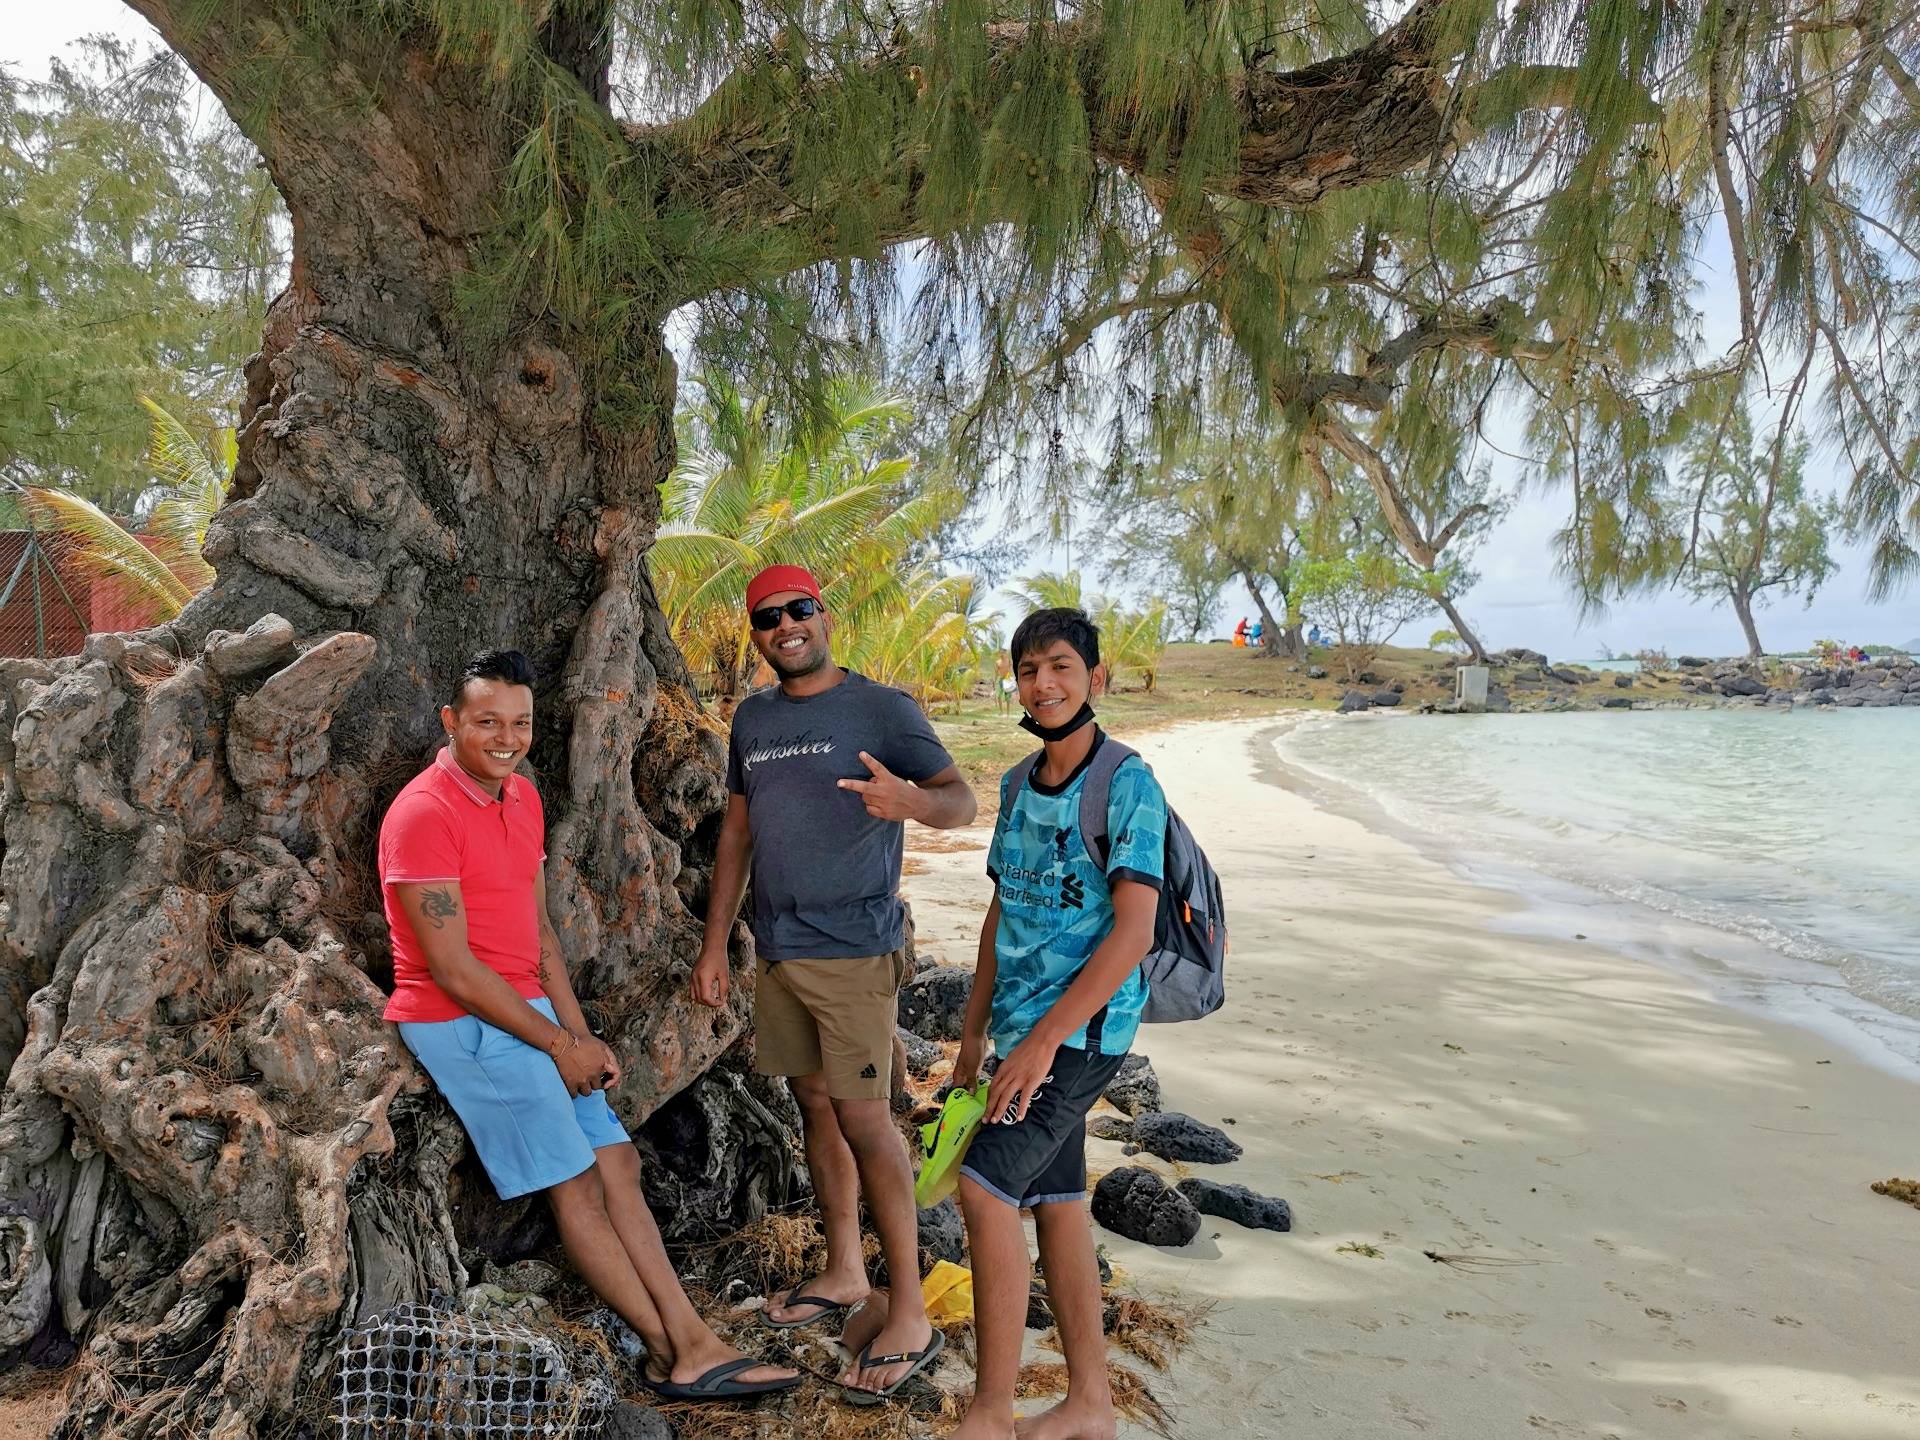 Niven, Arshaq and Zubair under the filao tree before entering the water...